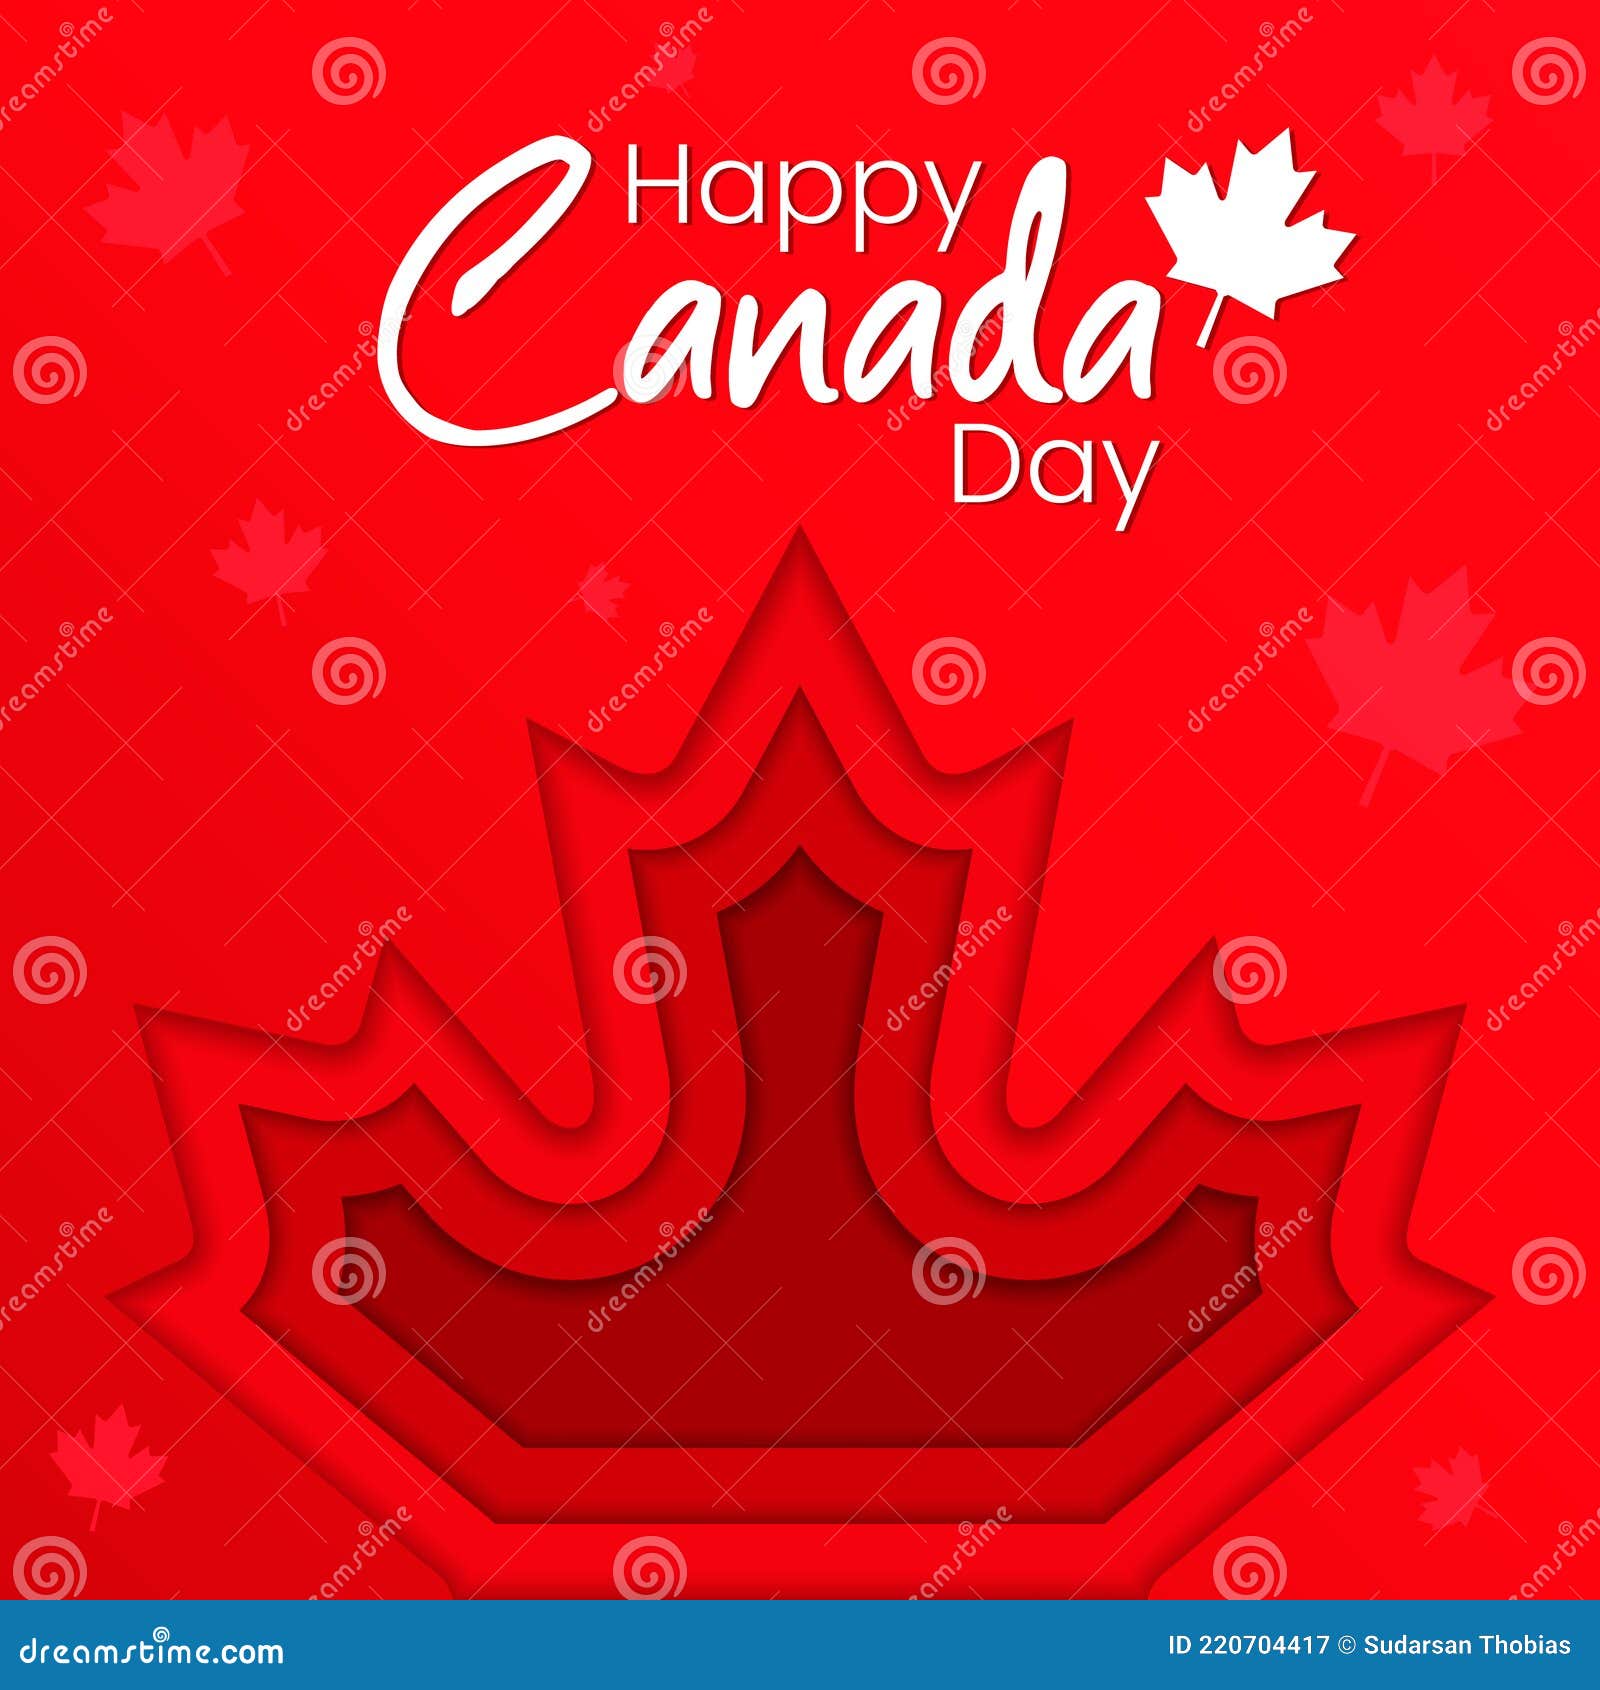 Poster happy canada day with maple leafs Vector Image